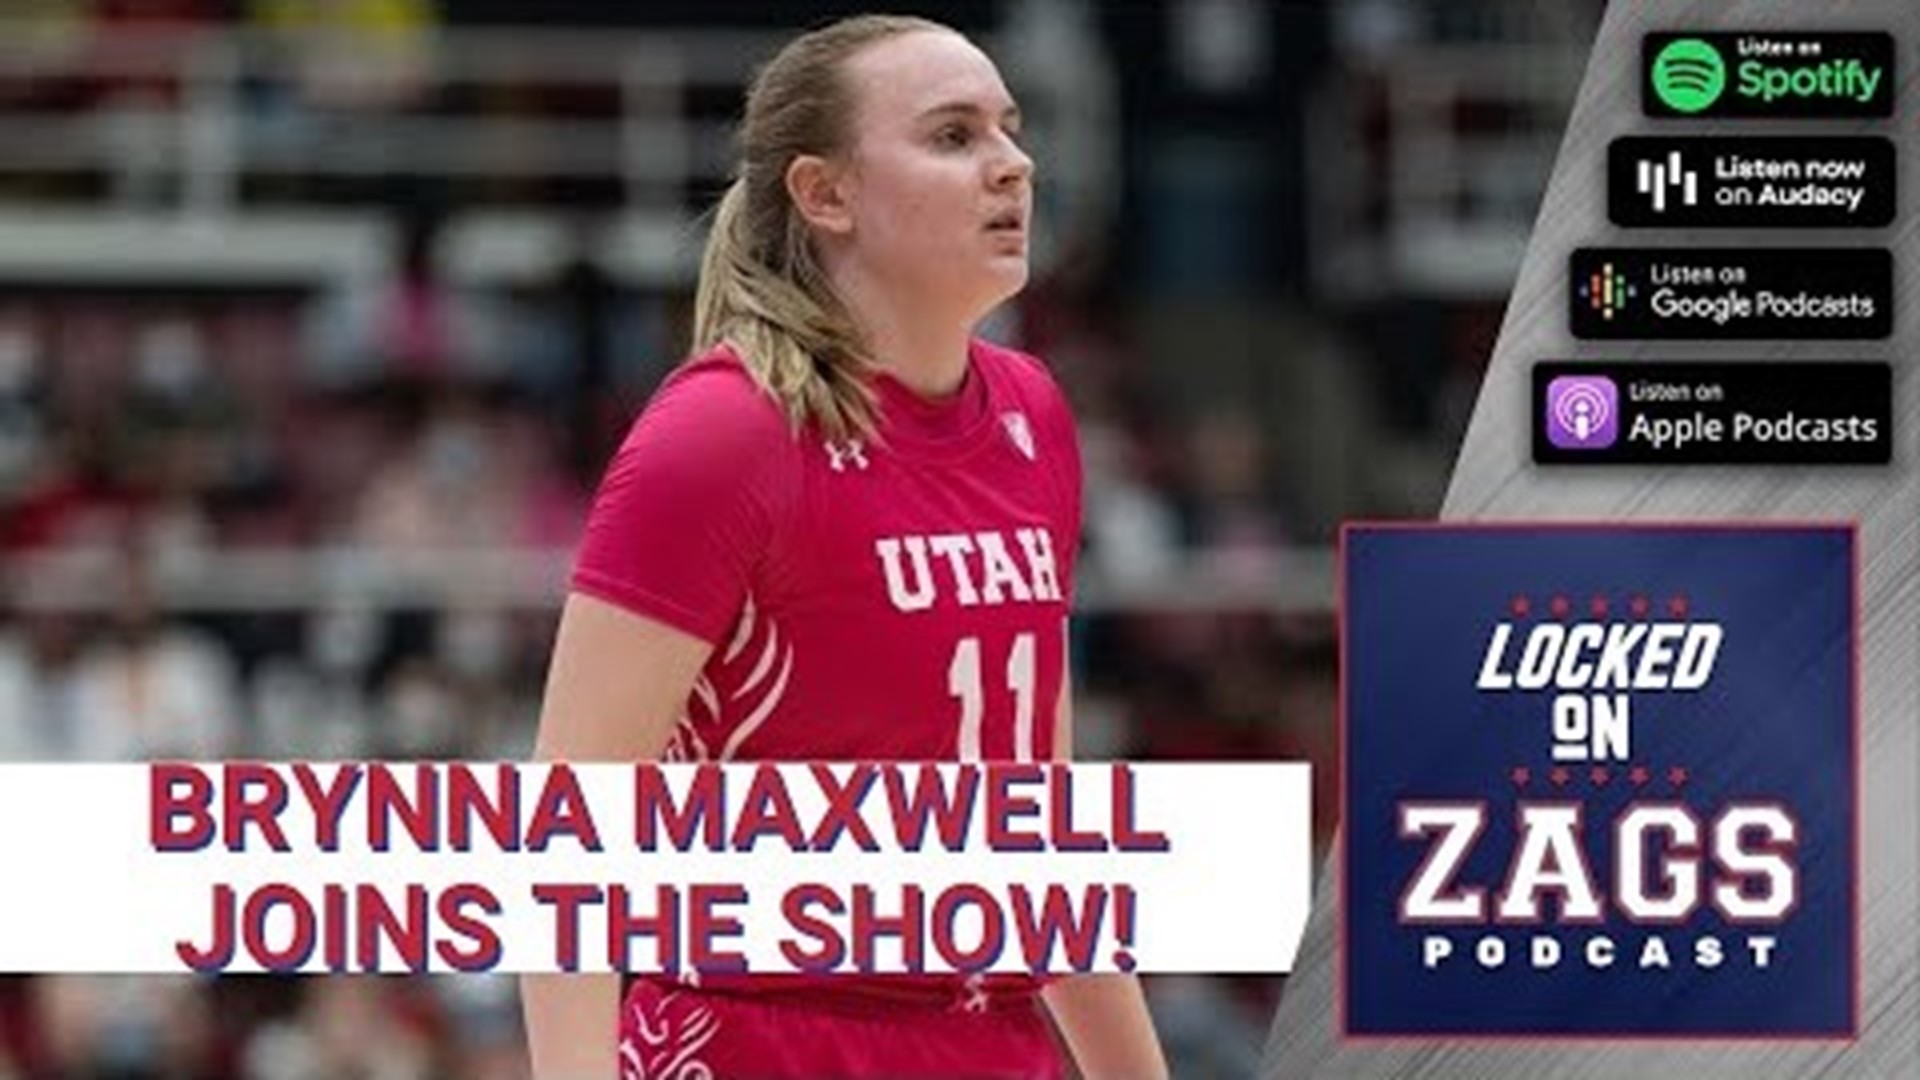 Gonzaga women's basketball player, Brynna Maxwell, is best three point shooter in the nation